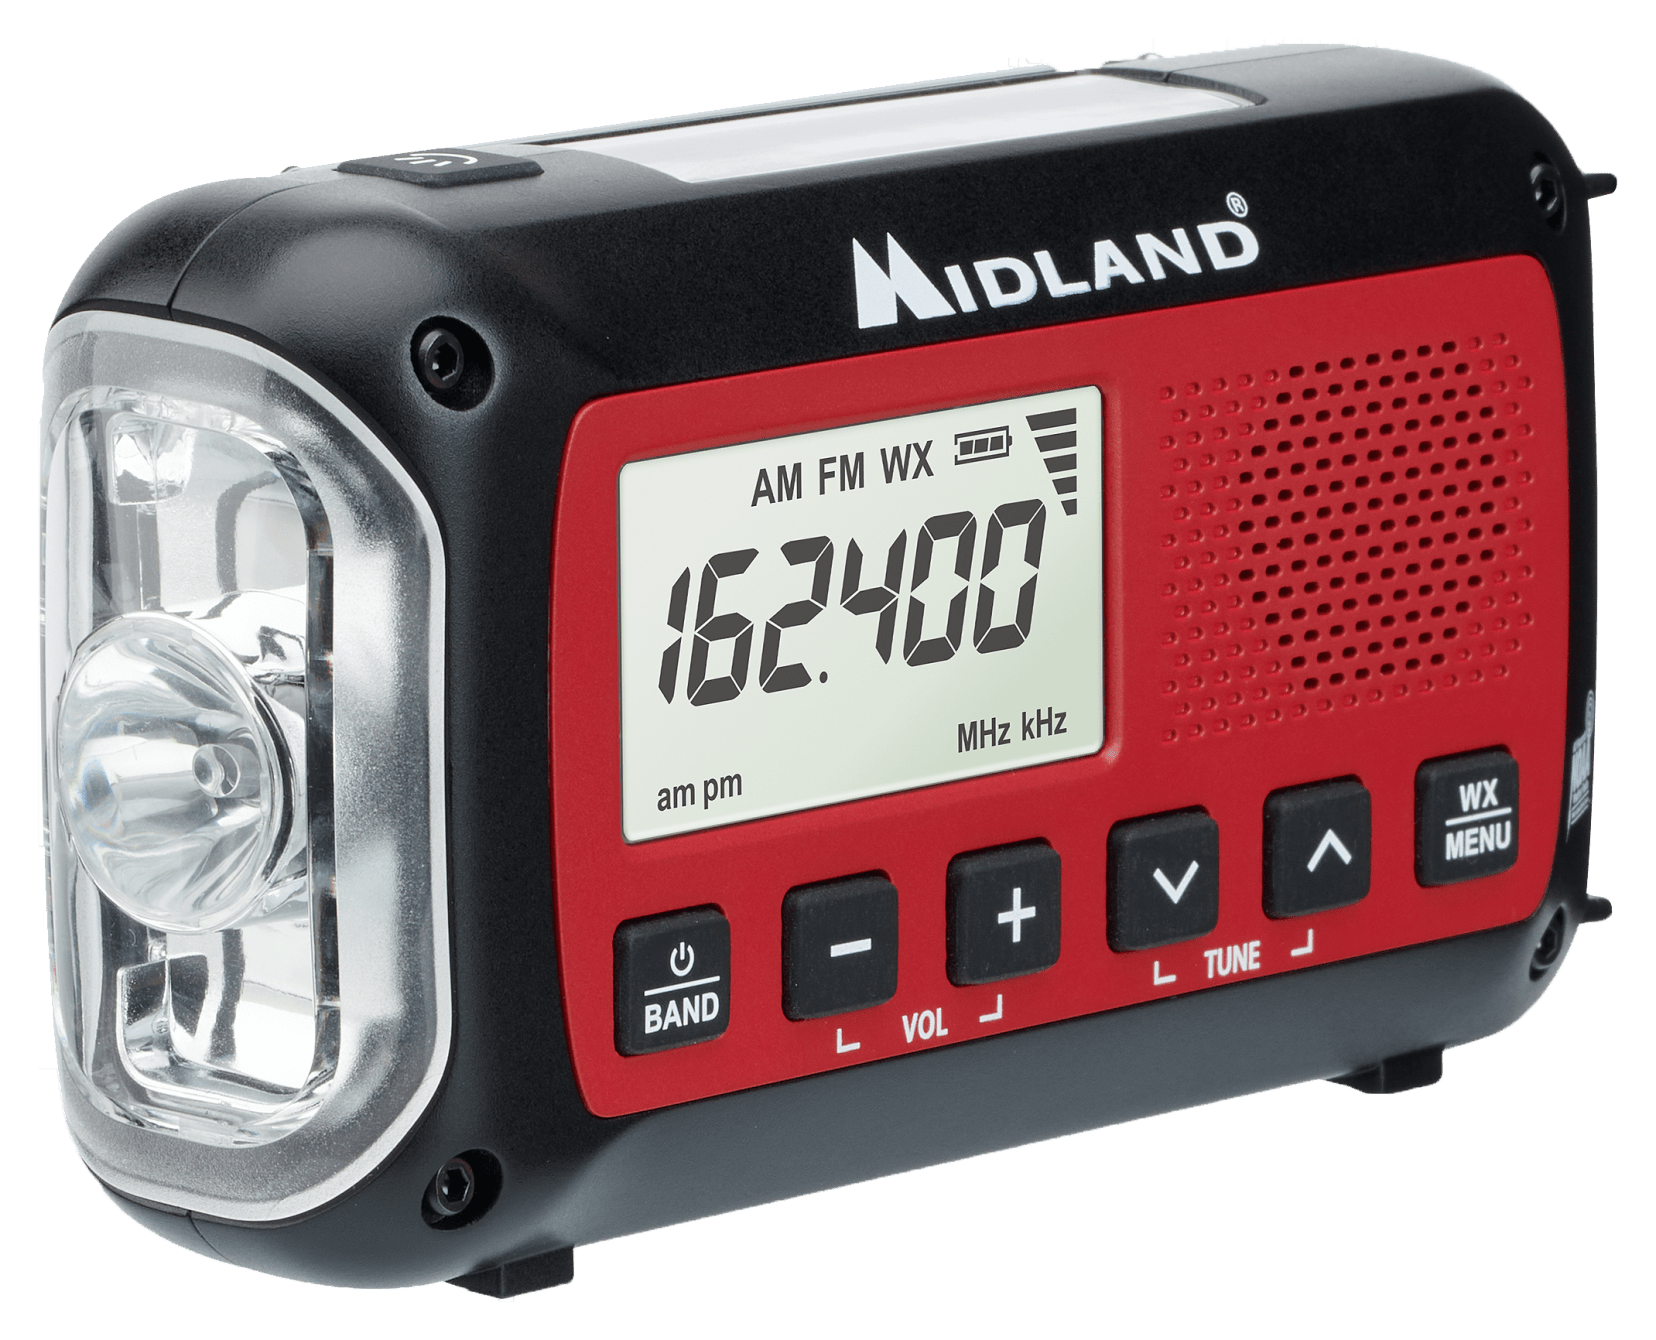 Midland ER40 Emergency Crank Weather Radio - gifts for outdoorsy dads